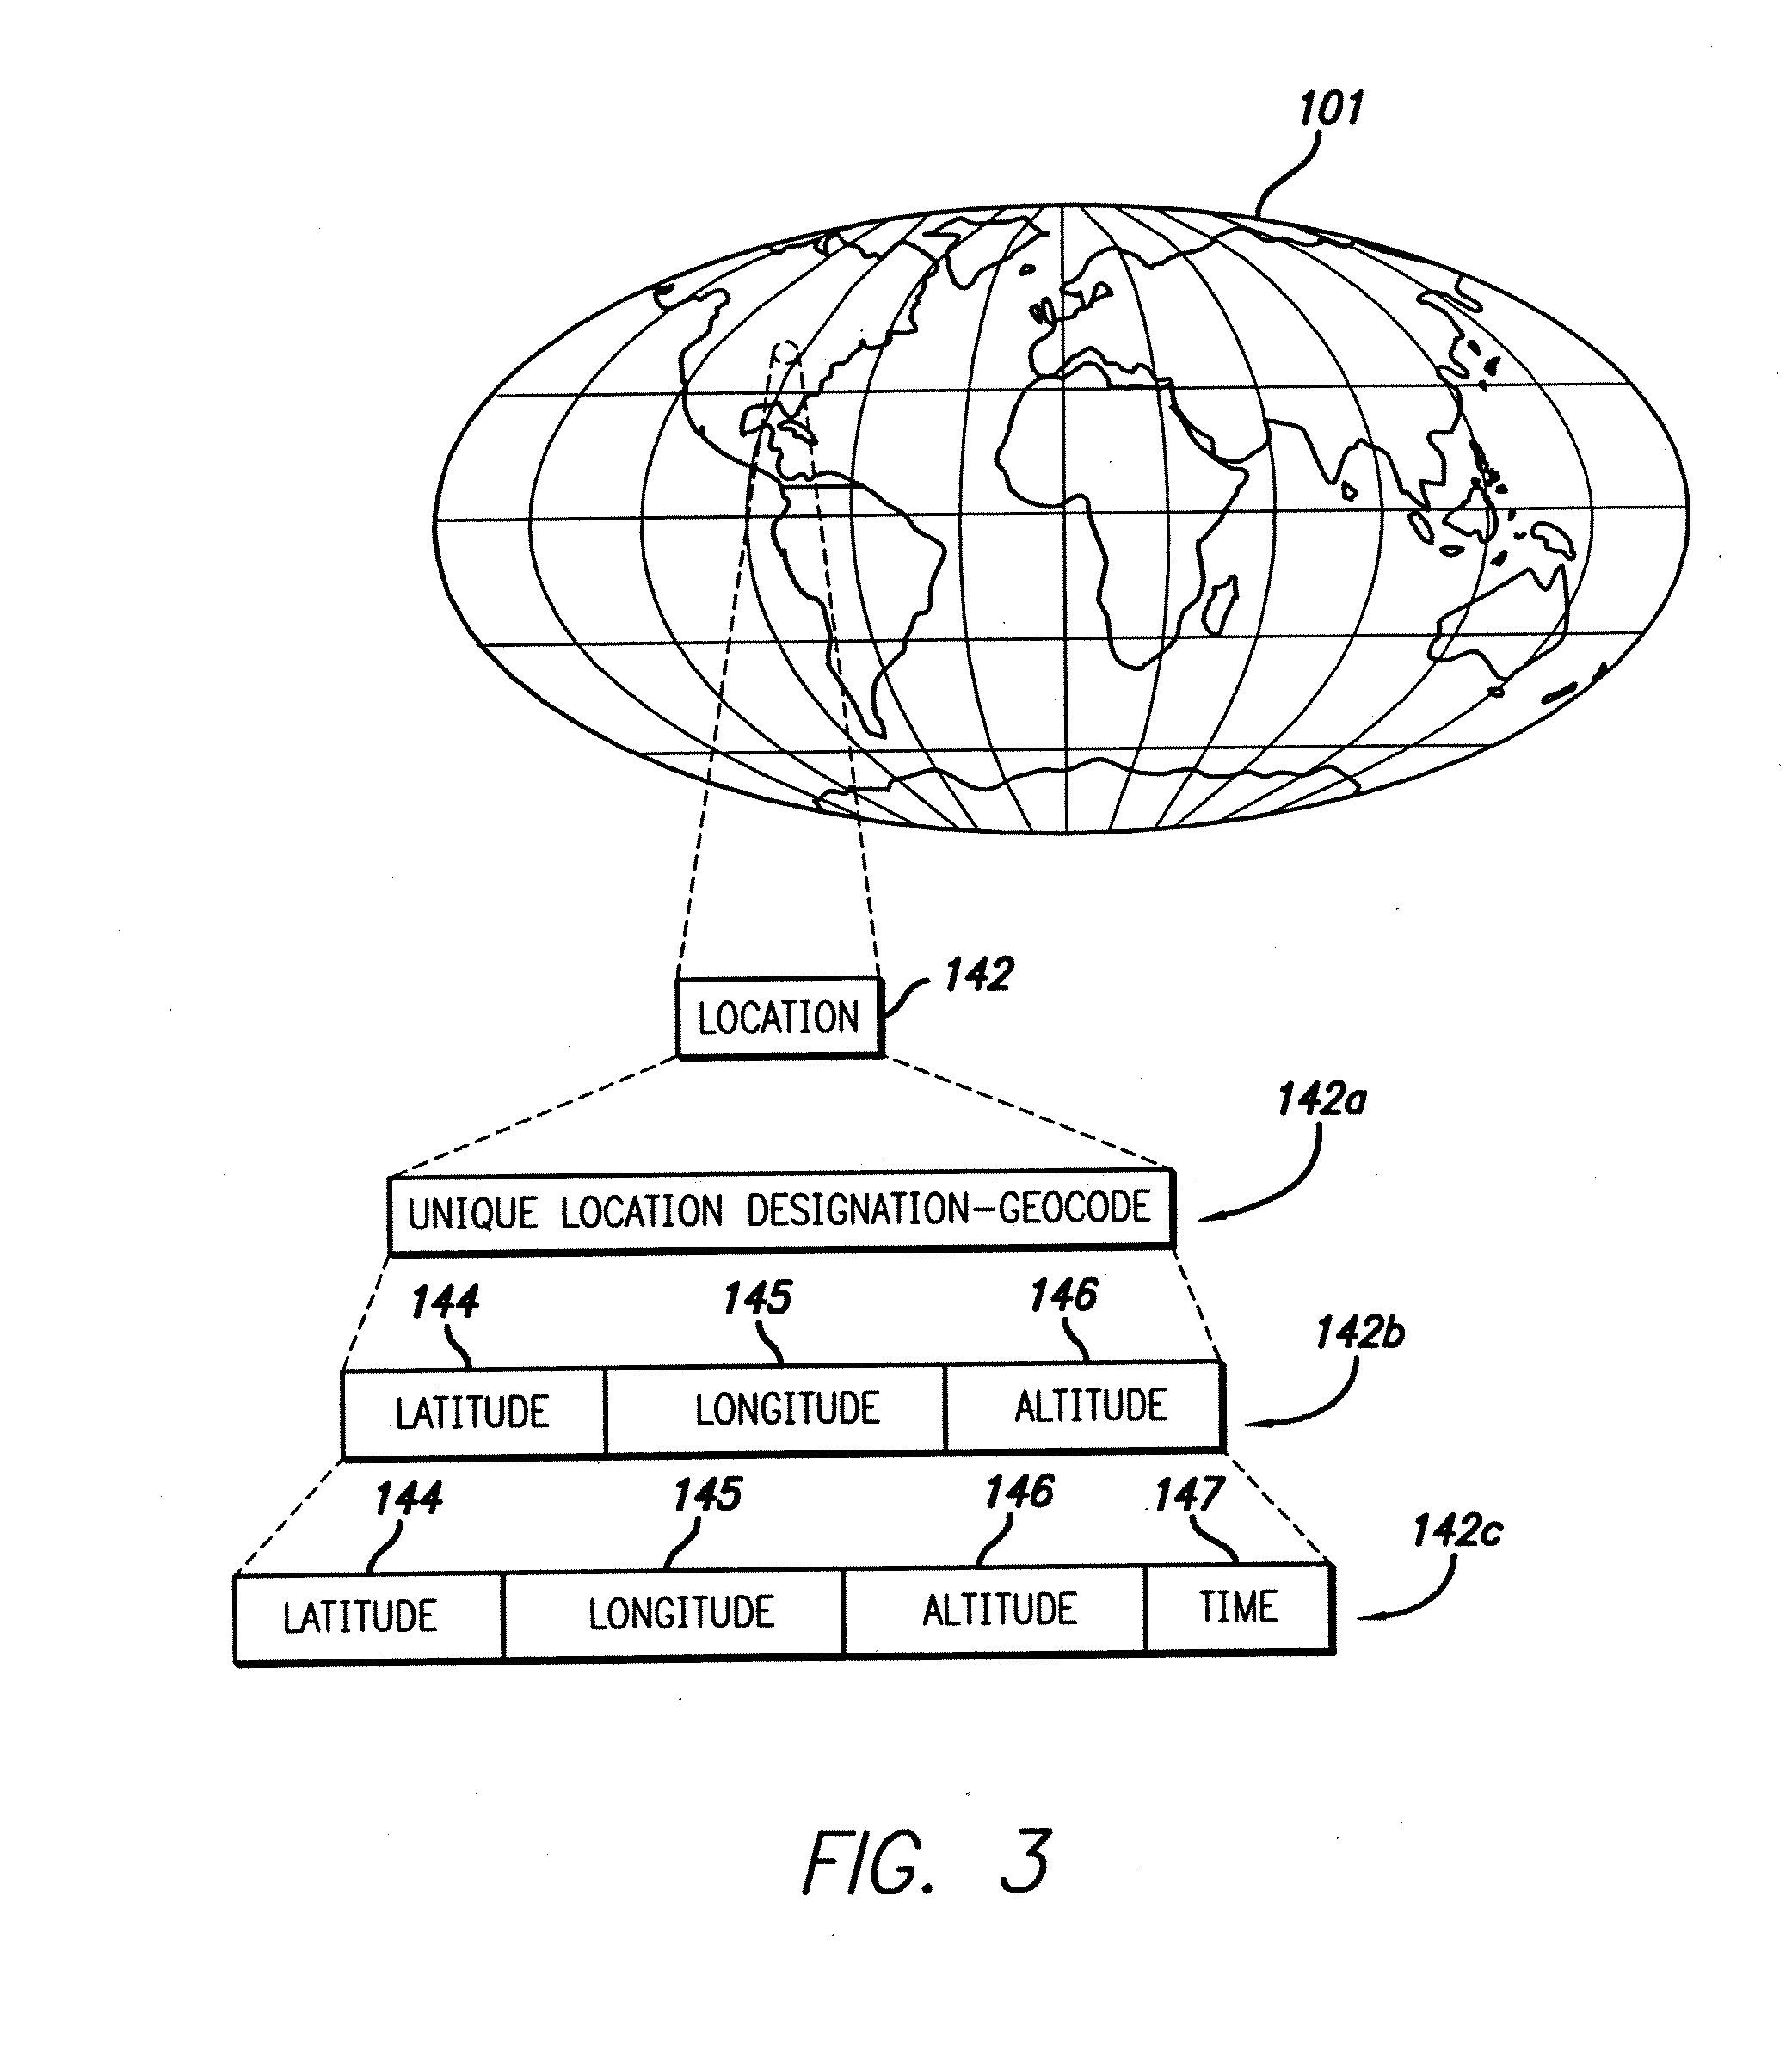 System and method for delivering encrypted information in a communication network using location indentity and key tables